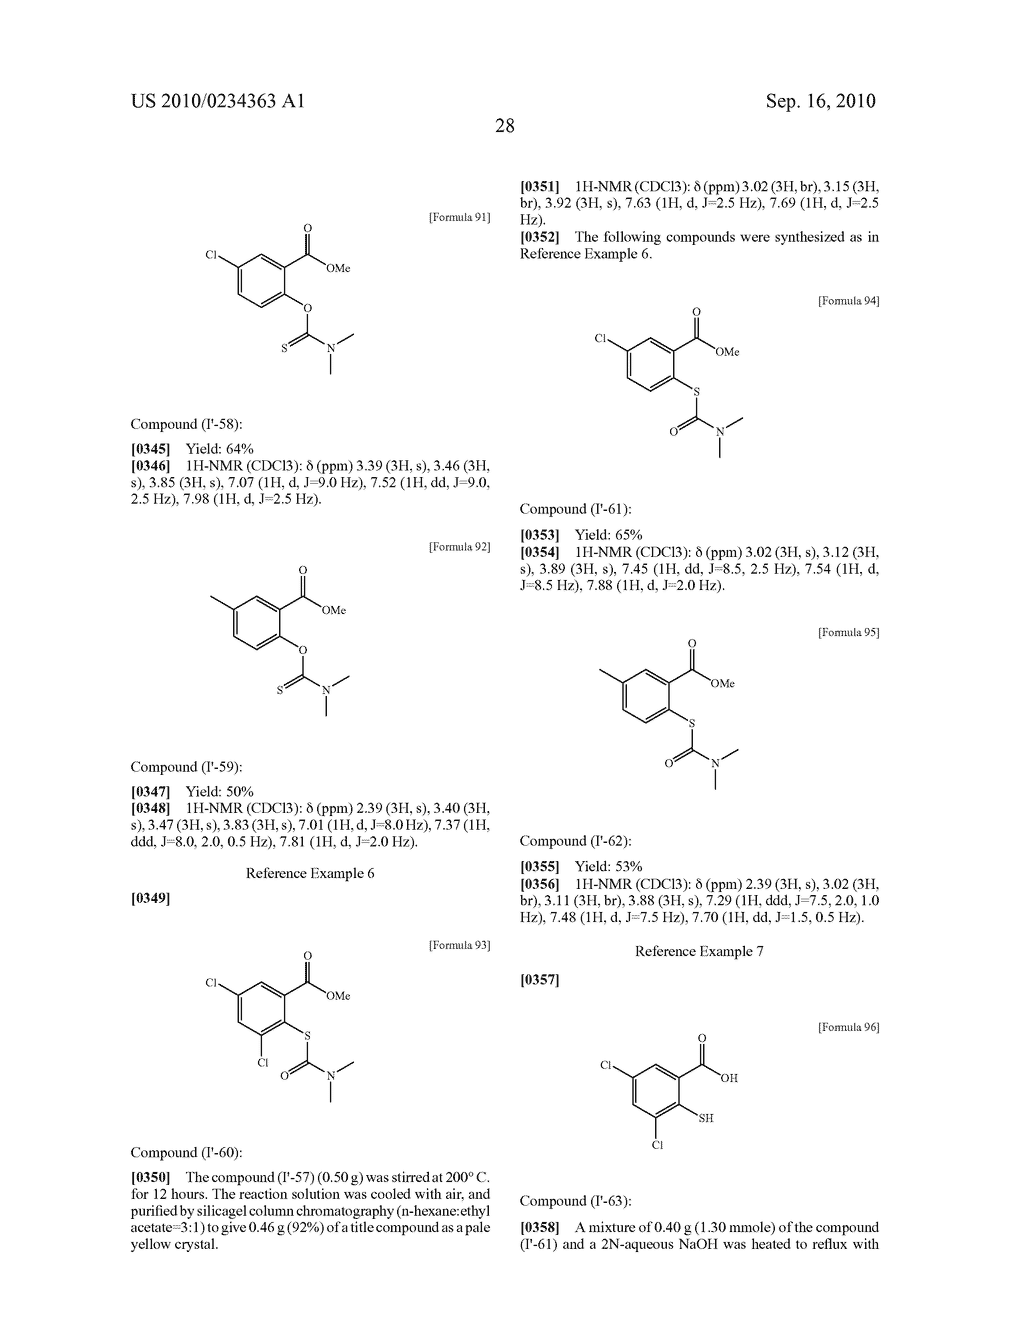 HETEROCYCLIC DERIVATIVE HAVING INHIBITORY ACTIVITY ON TYPE-I 11 DATA-HYDROXYSTEROID DEHYDROGENASE - diagram, schematic, and image 29